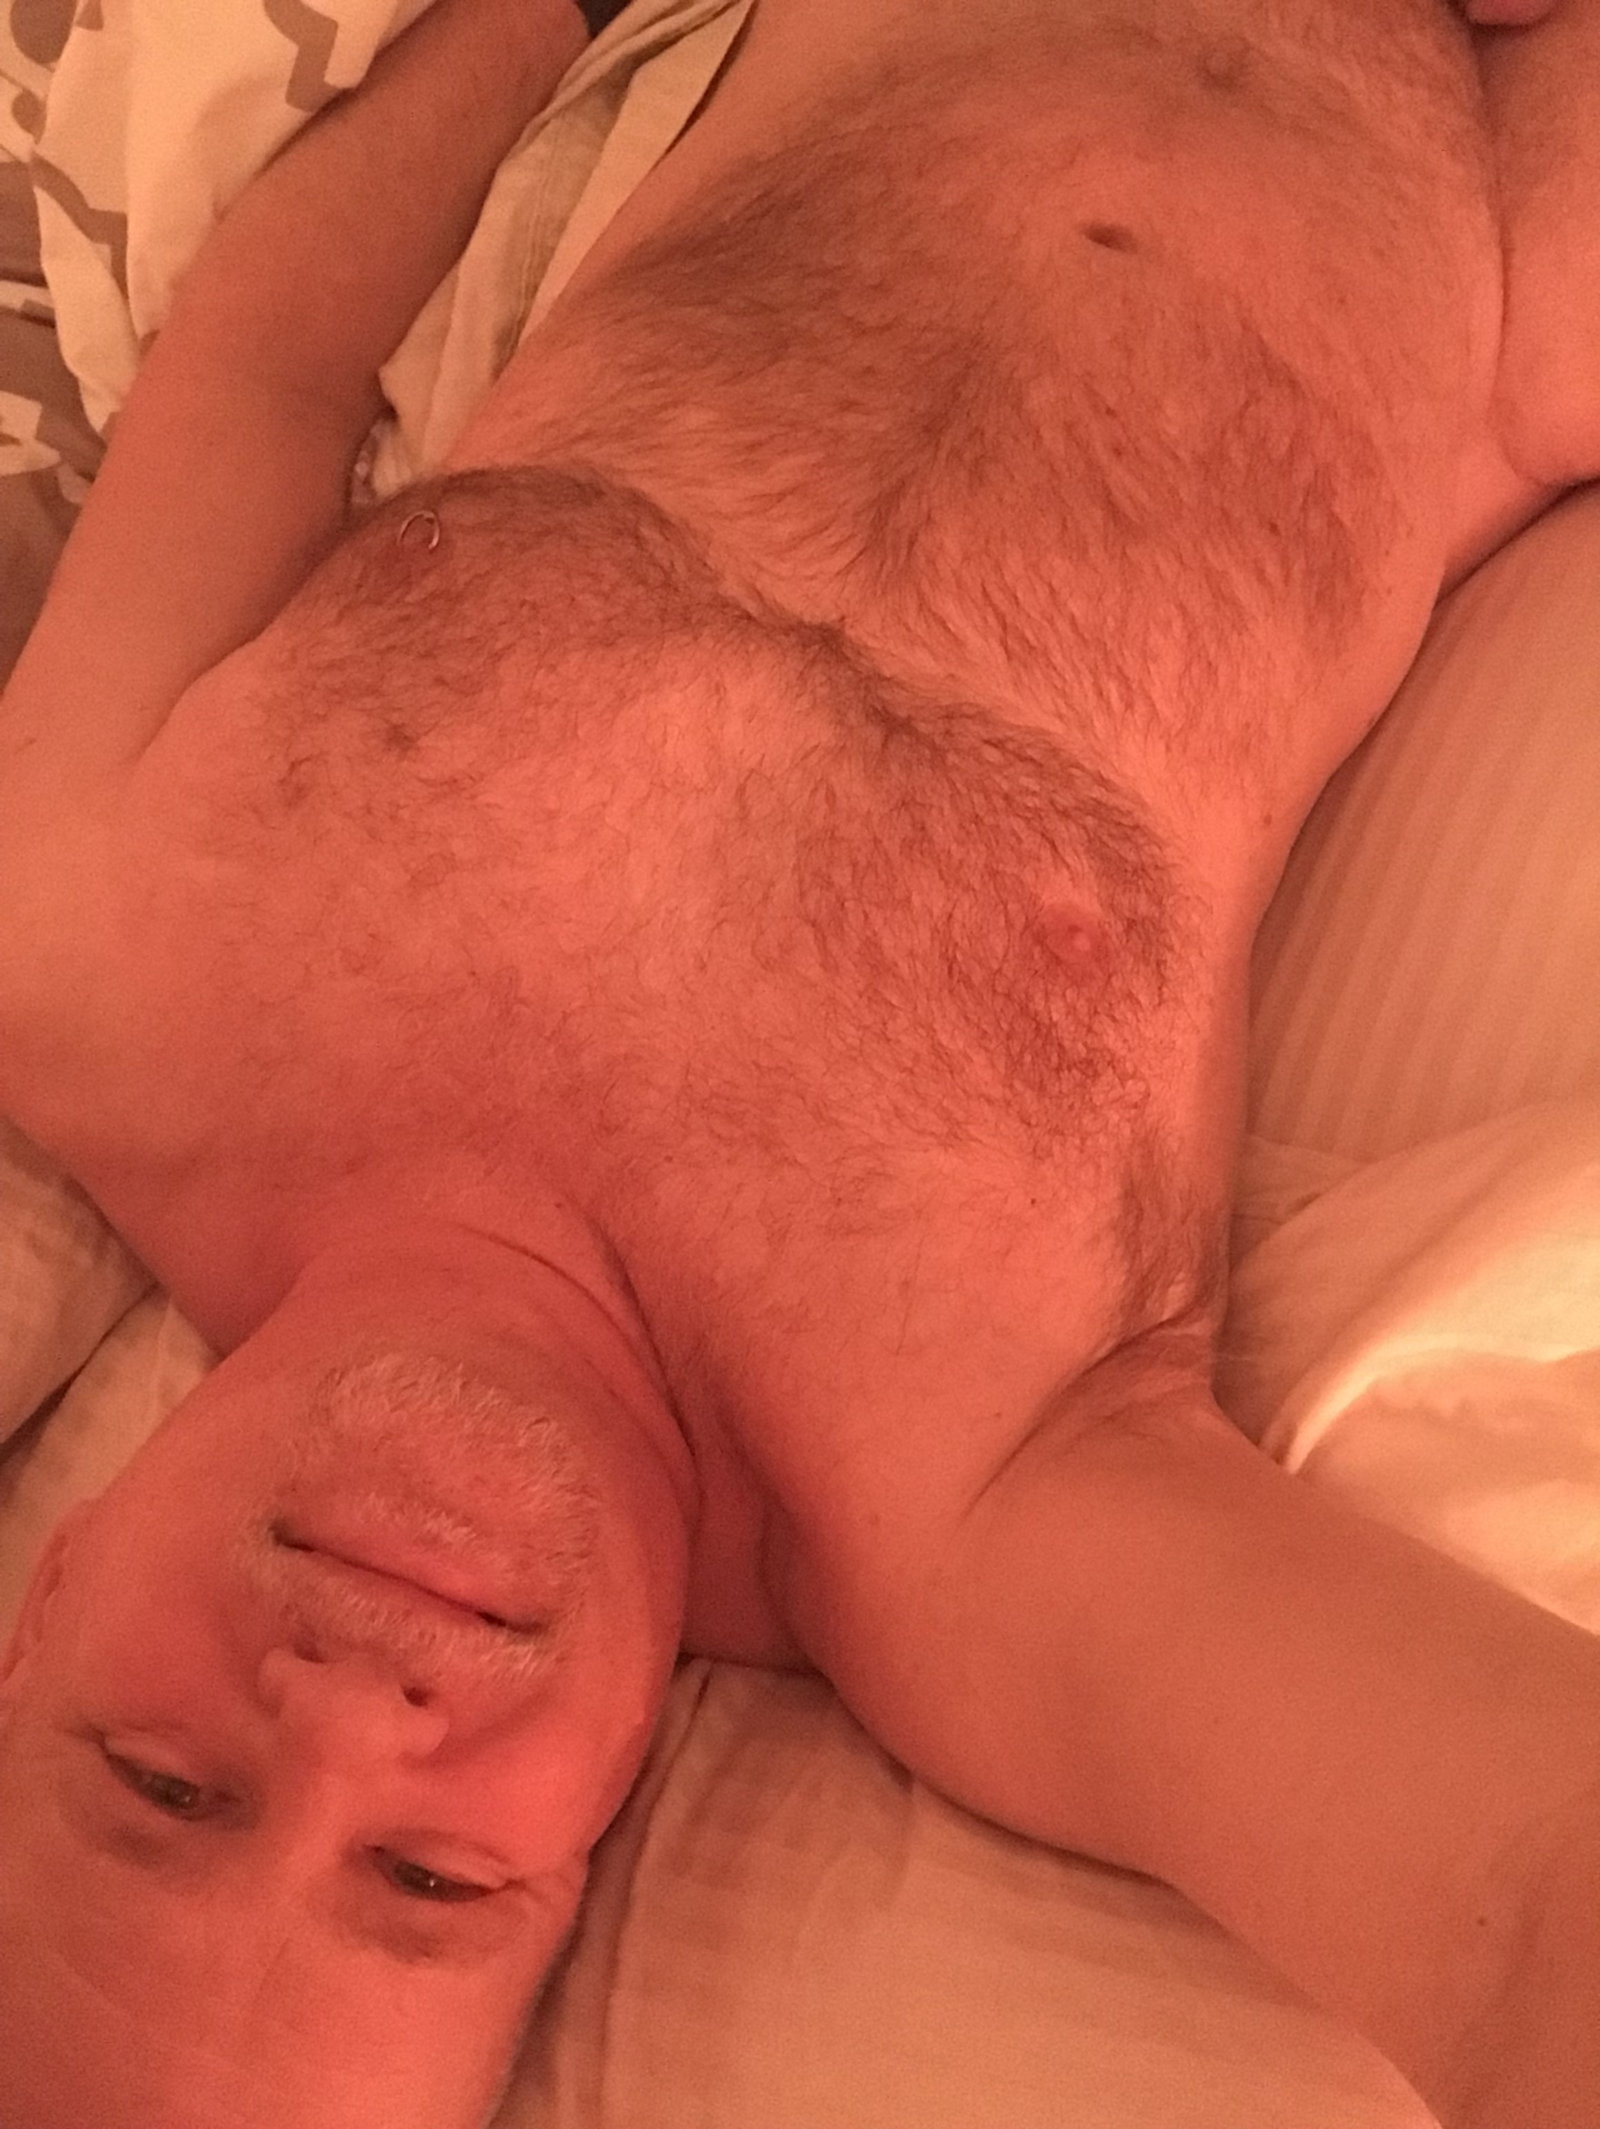 Photo by Nudist1966 with the username @Nudist1966,  March 16, 2020 at 10:53 PM. The post is about the topic Male Body Hair and the text says 'My hairy chest. Not shy at all, want to see more just ask'